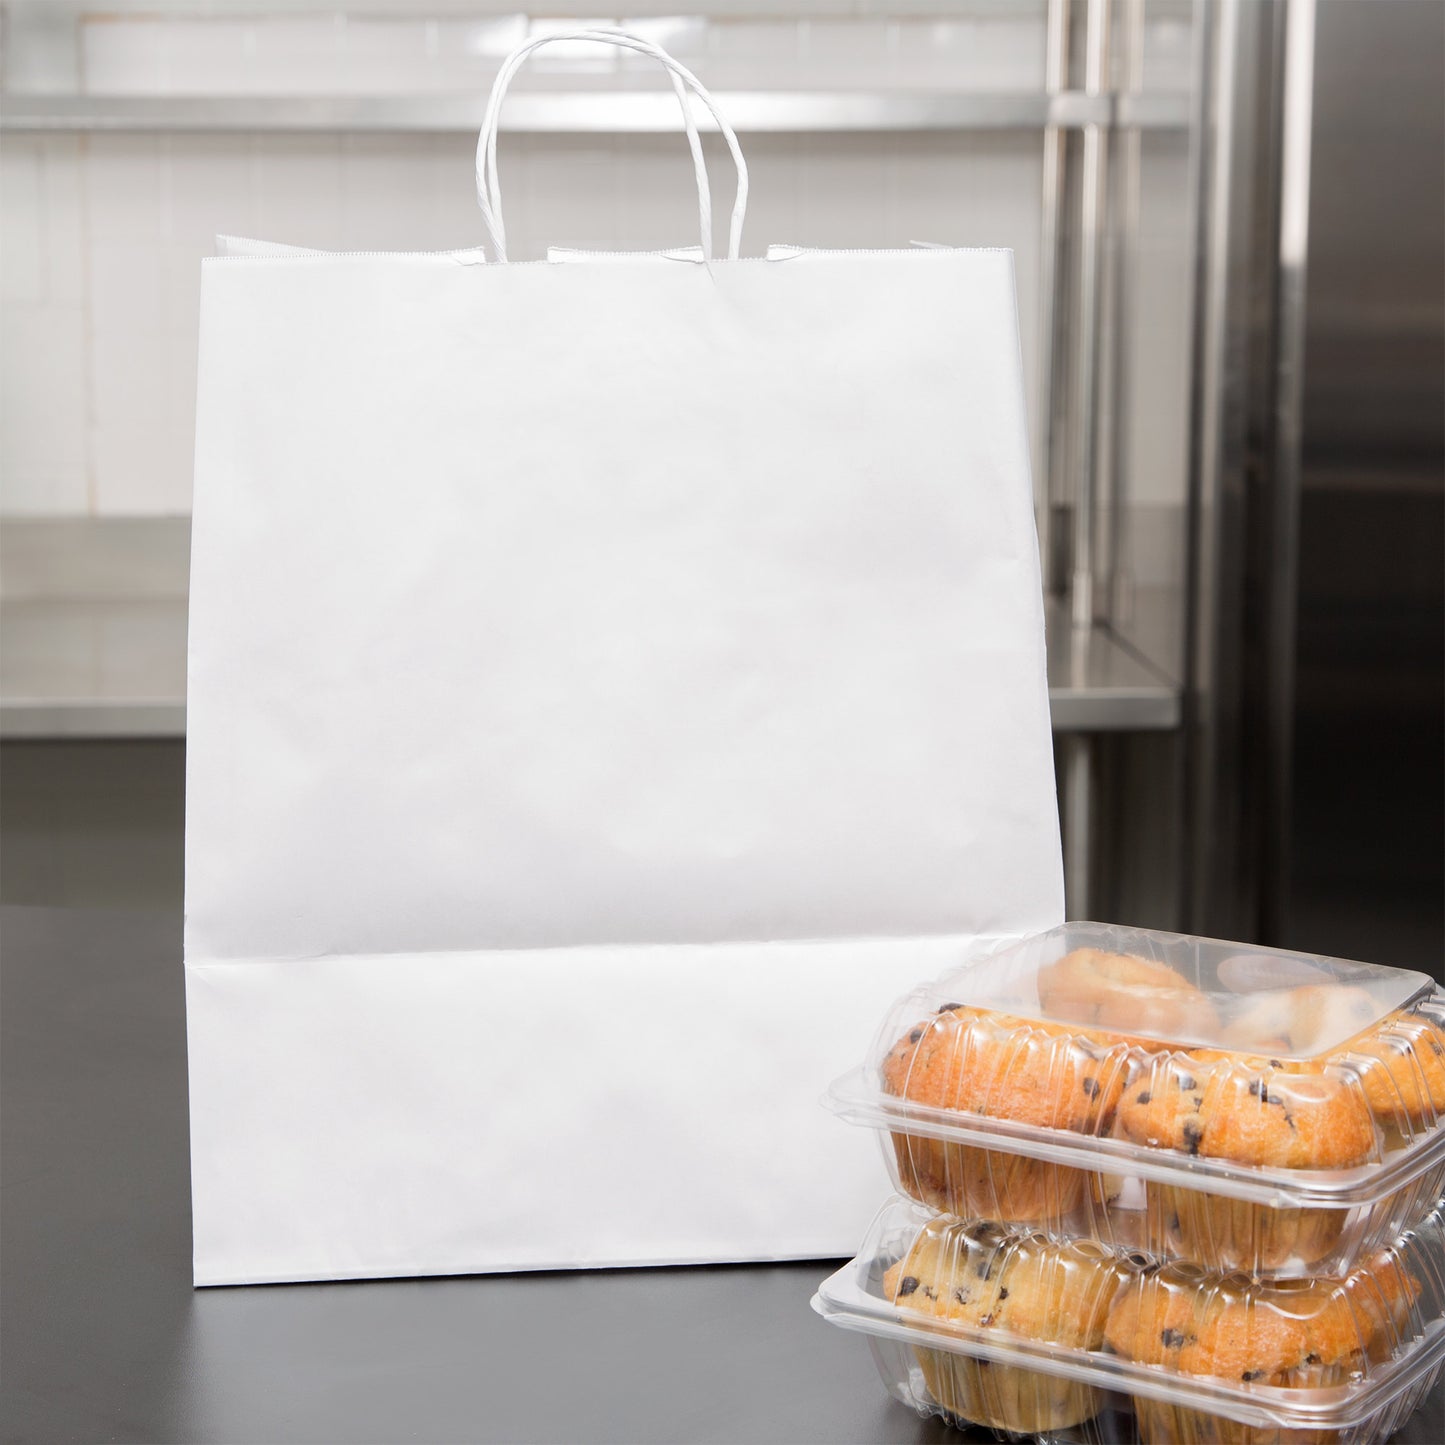 These Eco-friendly 8in x 4.5in x 10.25in Duro Bag® 60# White Tempo Paper Shopping Bags with gusseted flat bottom and paper twist handles ares sold 200 per bundle.